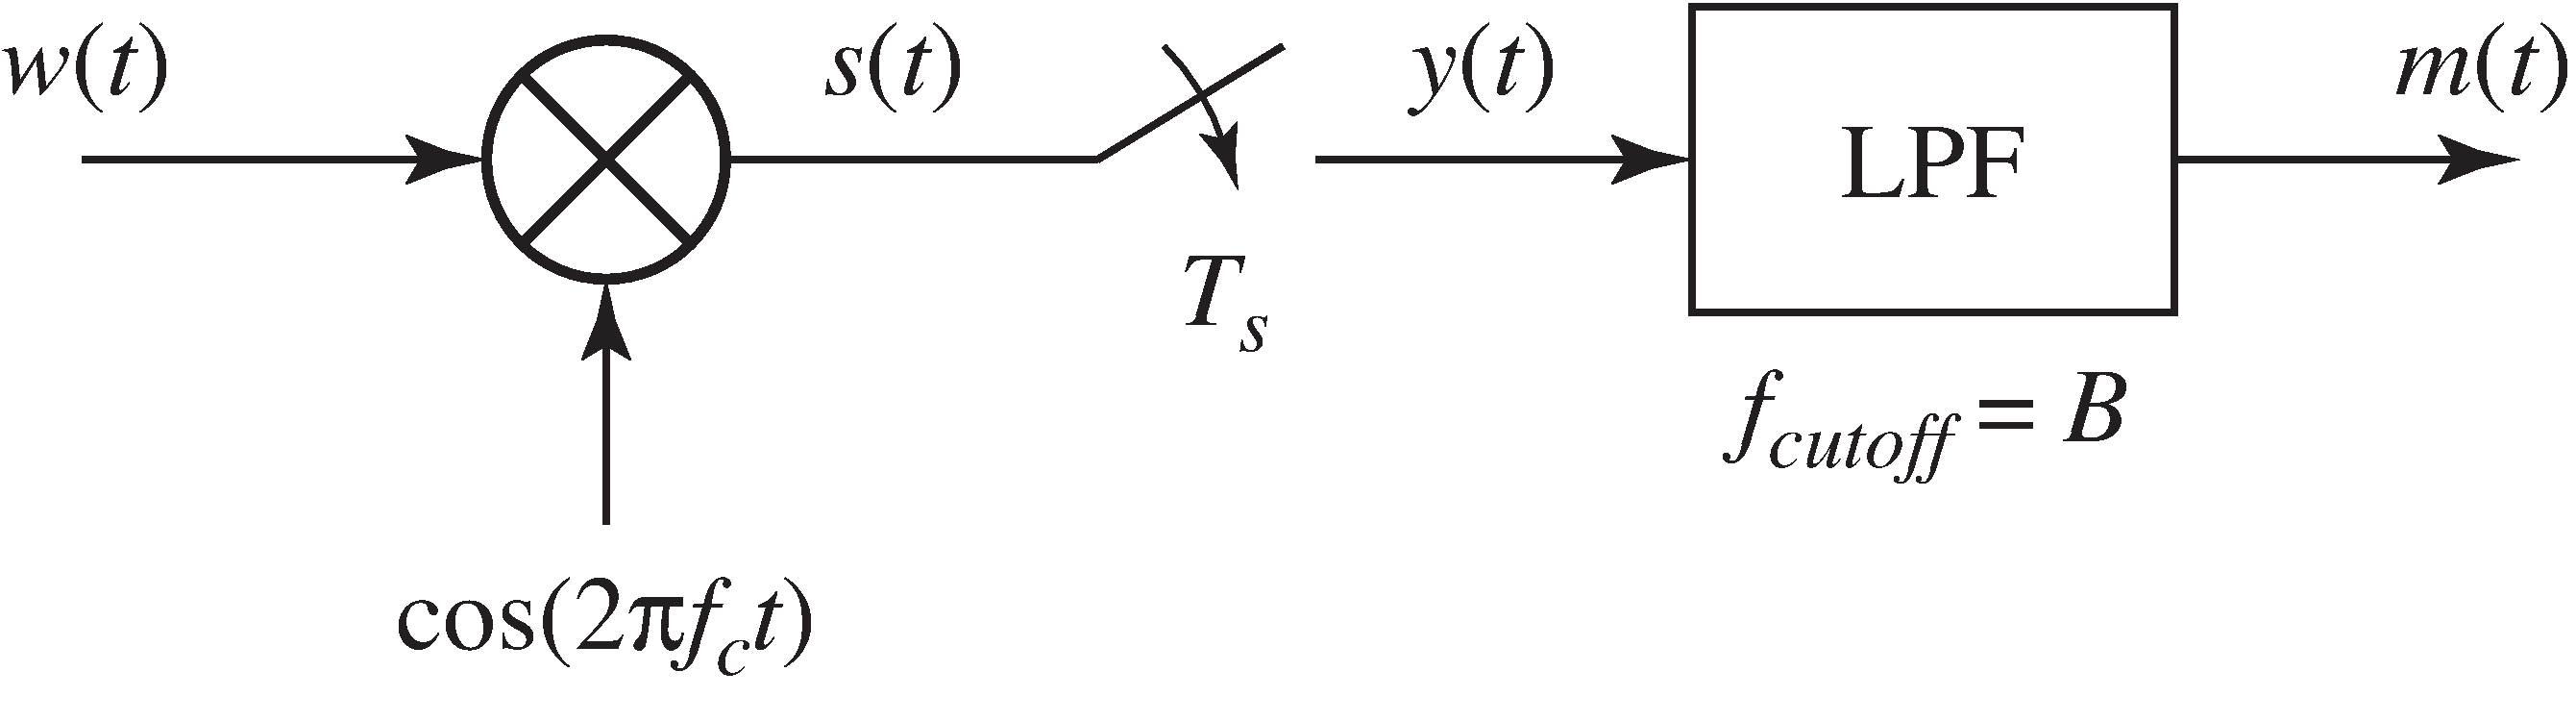 System diagram showing how sampling can be used to downconvert a signal. The spectra corresponding to w(t), s(t) and y(t) are shown in Figure 6-6. The output of the LPF contains only the “M” shaped portion nearest zero.